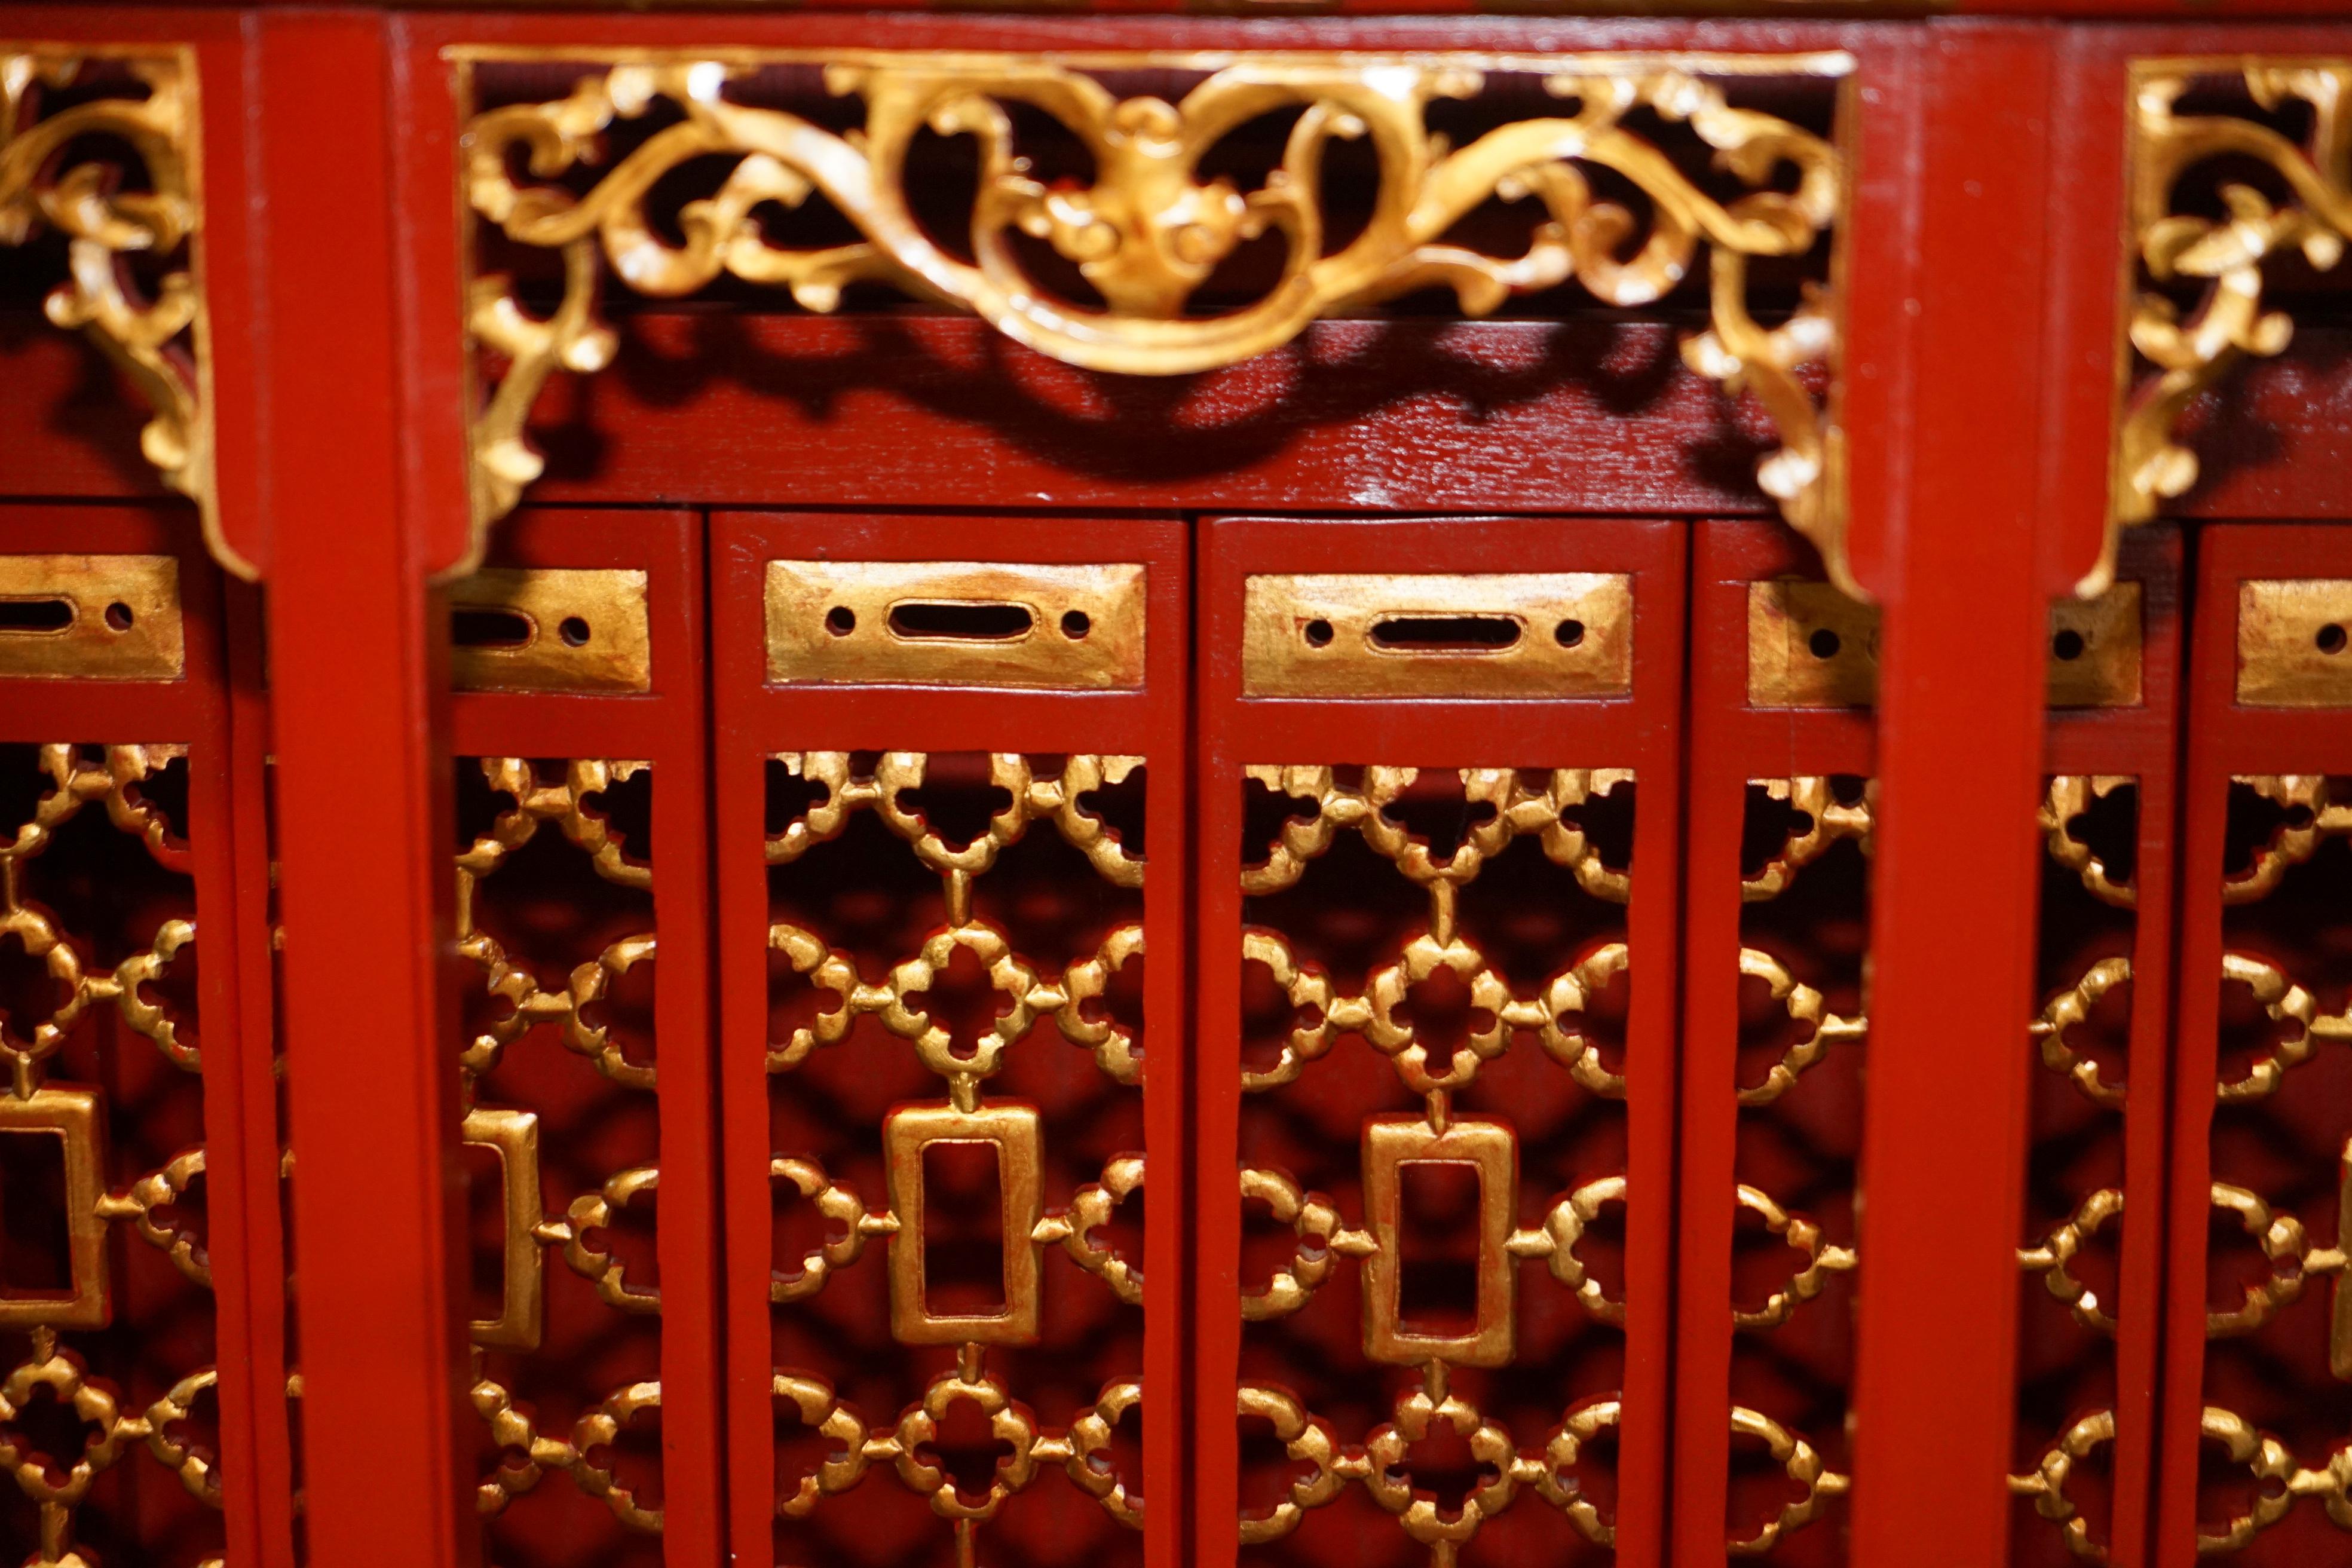 Rare Oriental Chinese Export Vintage Pagoda Top Red Cabinet Very Decorative For Sale 3